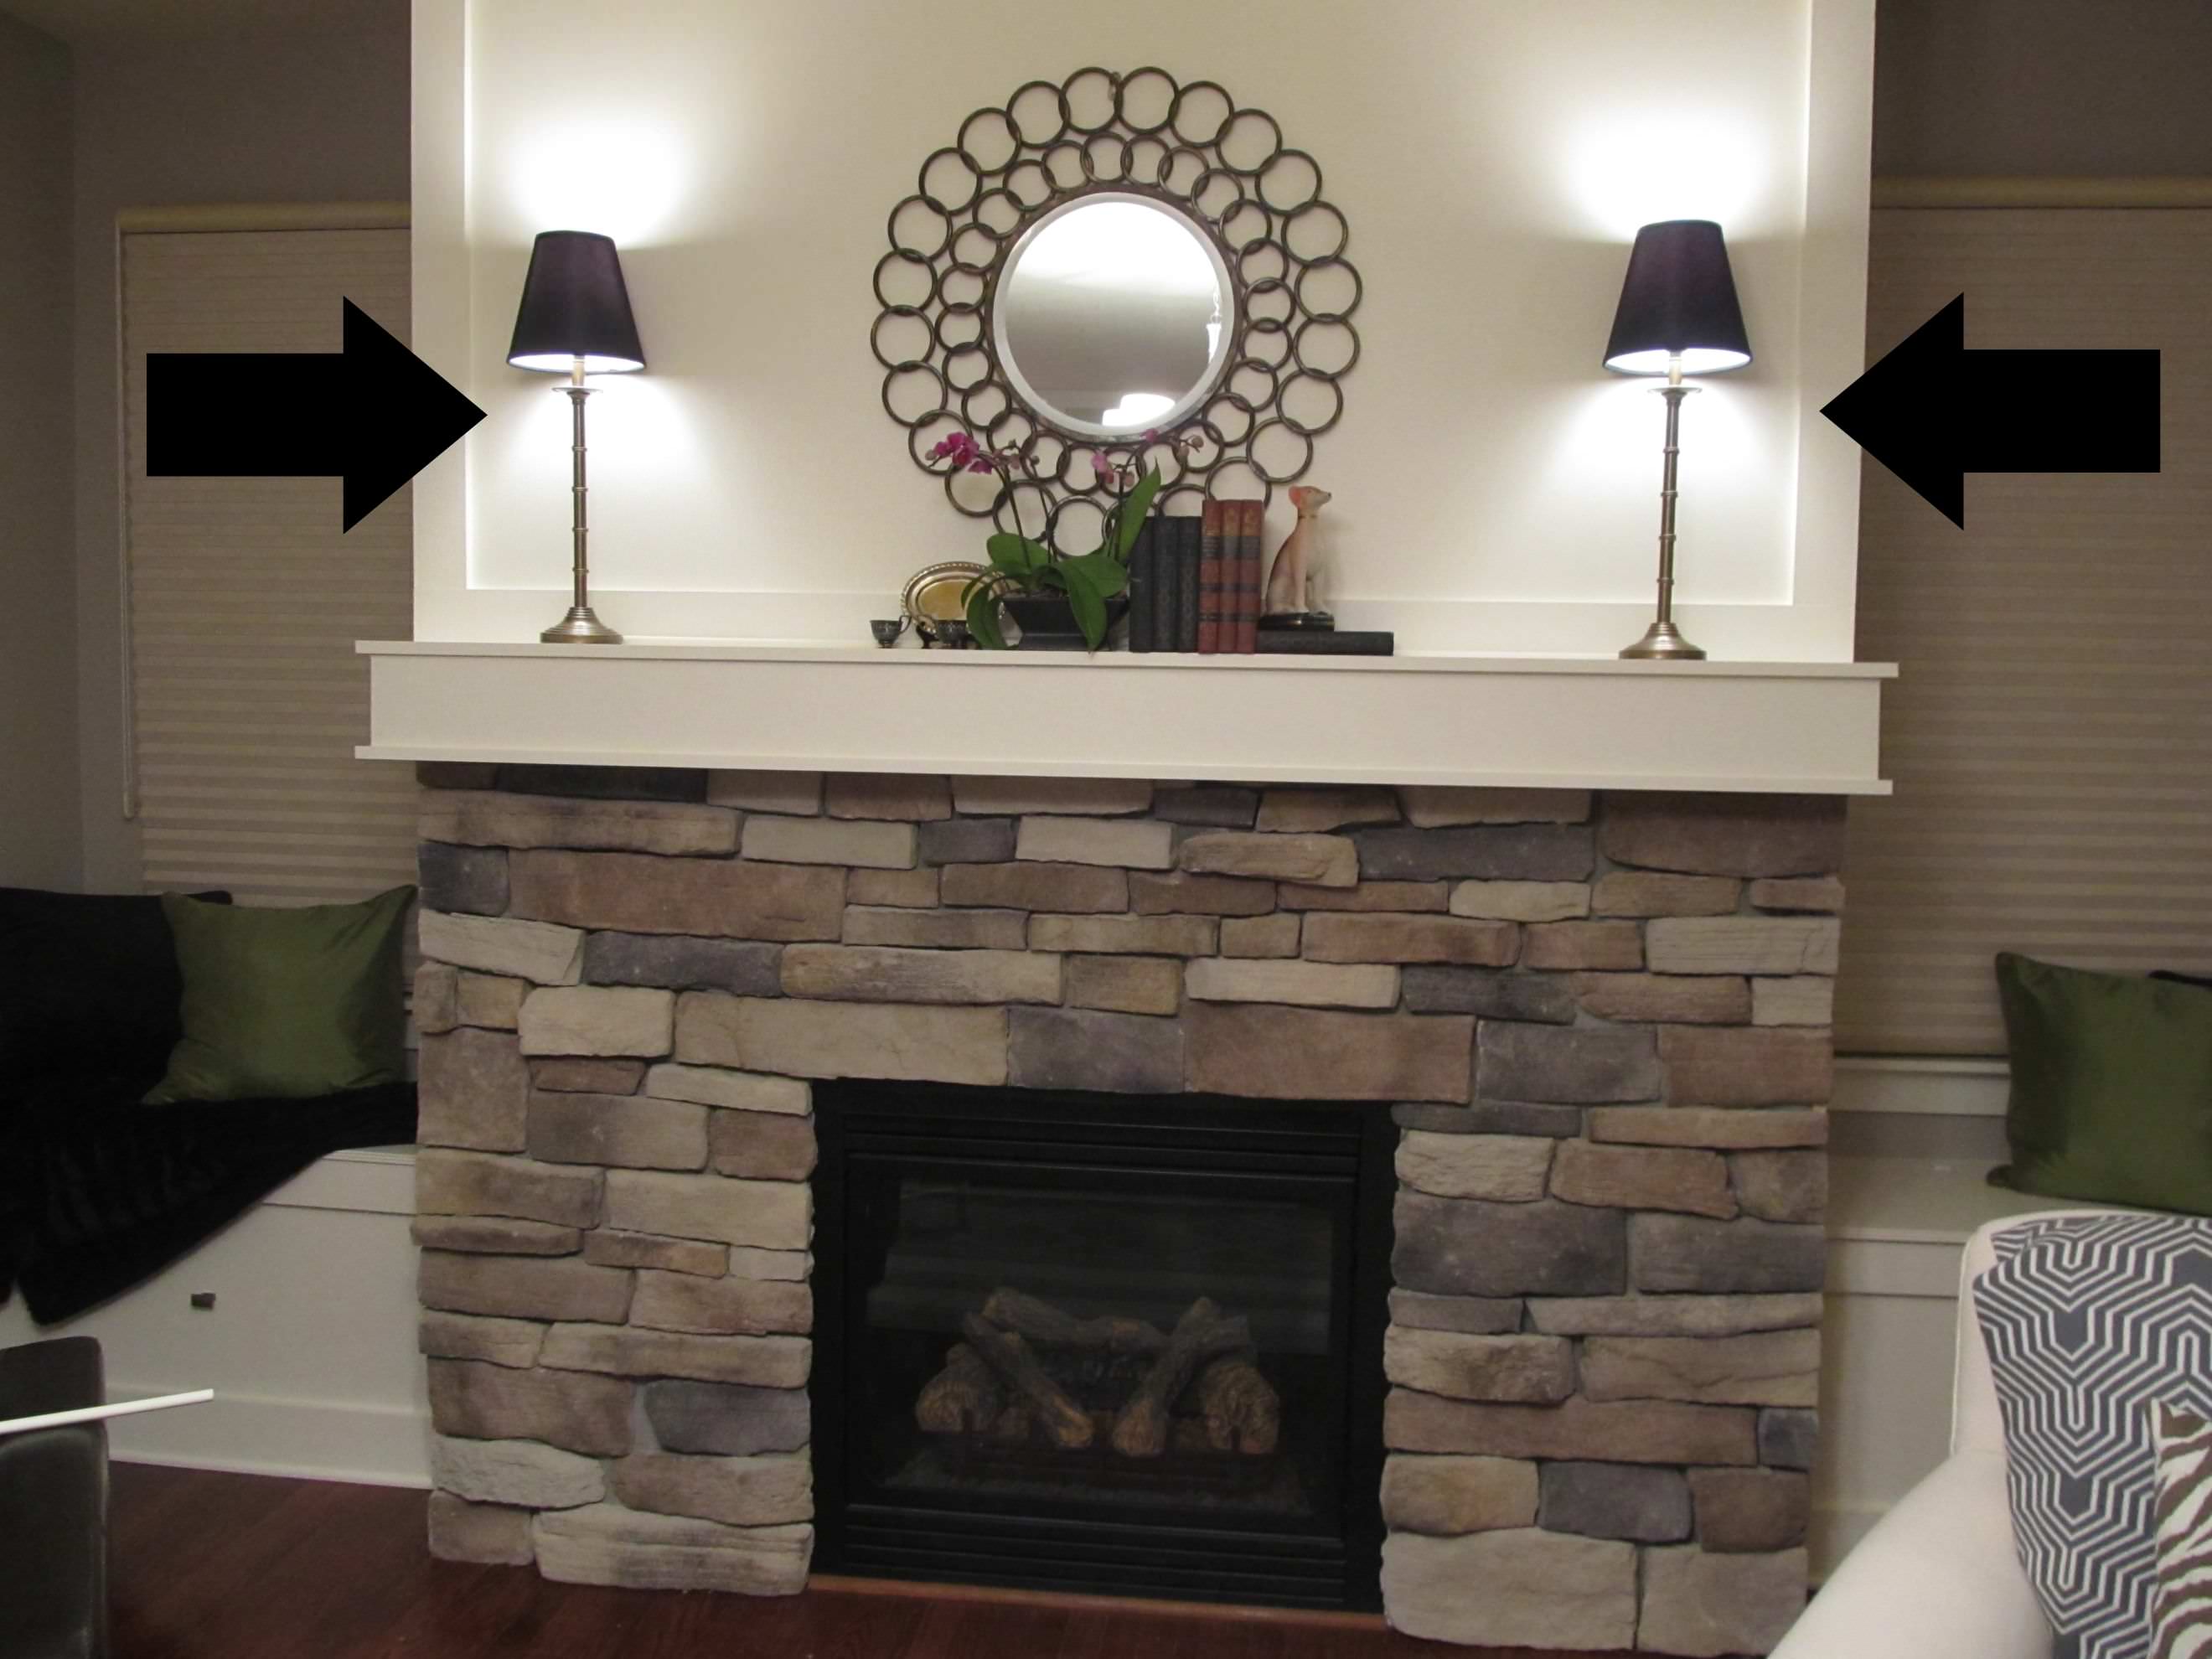 How to Decorate Fireplace Area